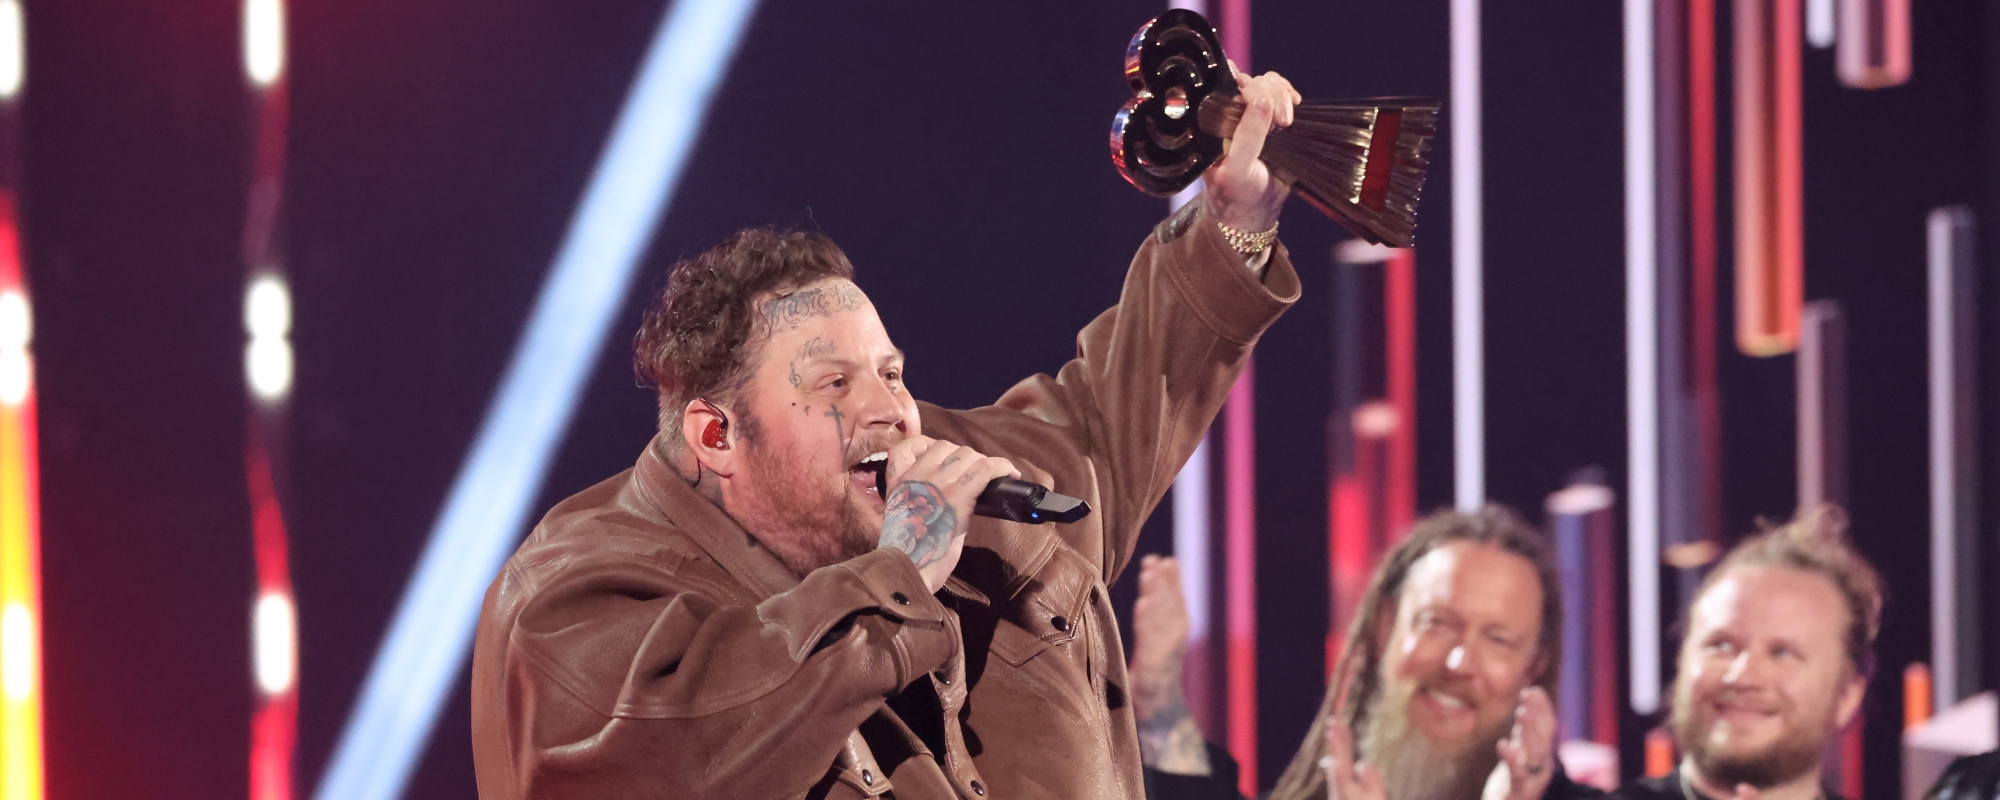 Jelly Roll’s Impassioned Speech at iHeartRadio Music Awards Earns Standing Ovation, Leaves Fans in Tears